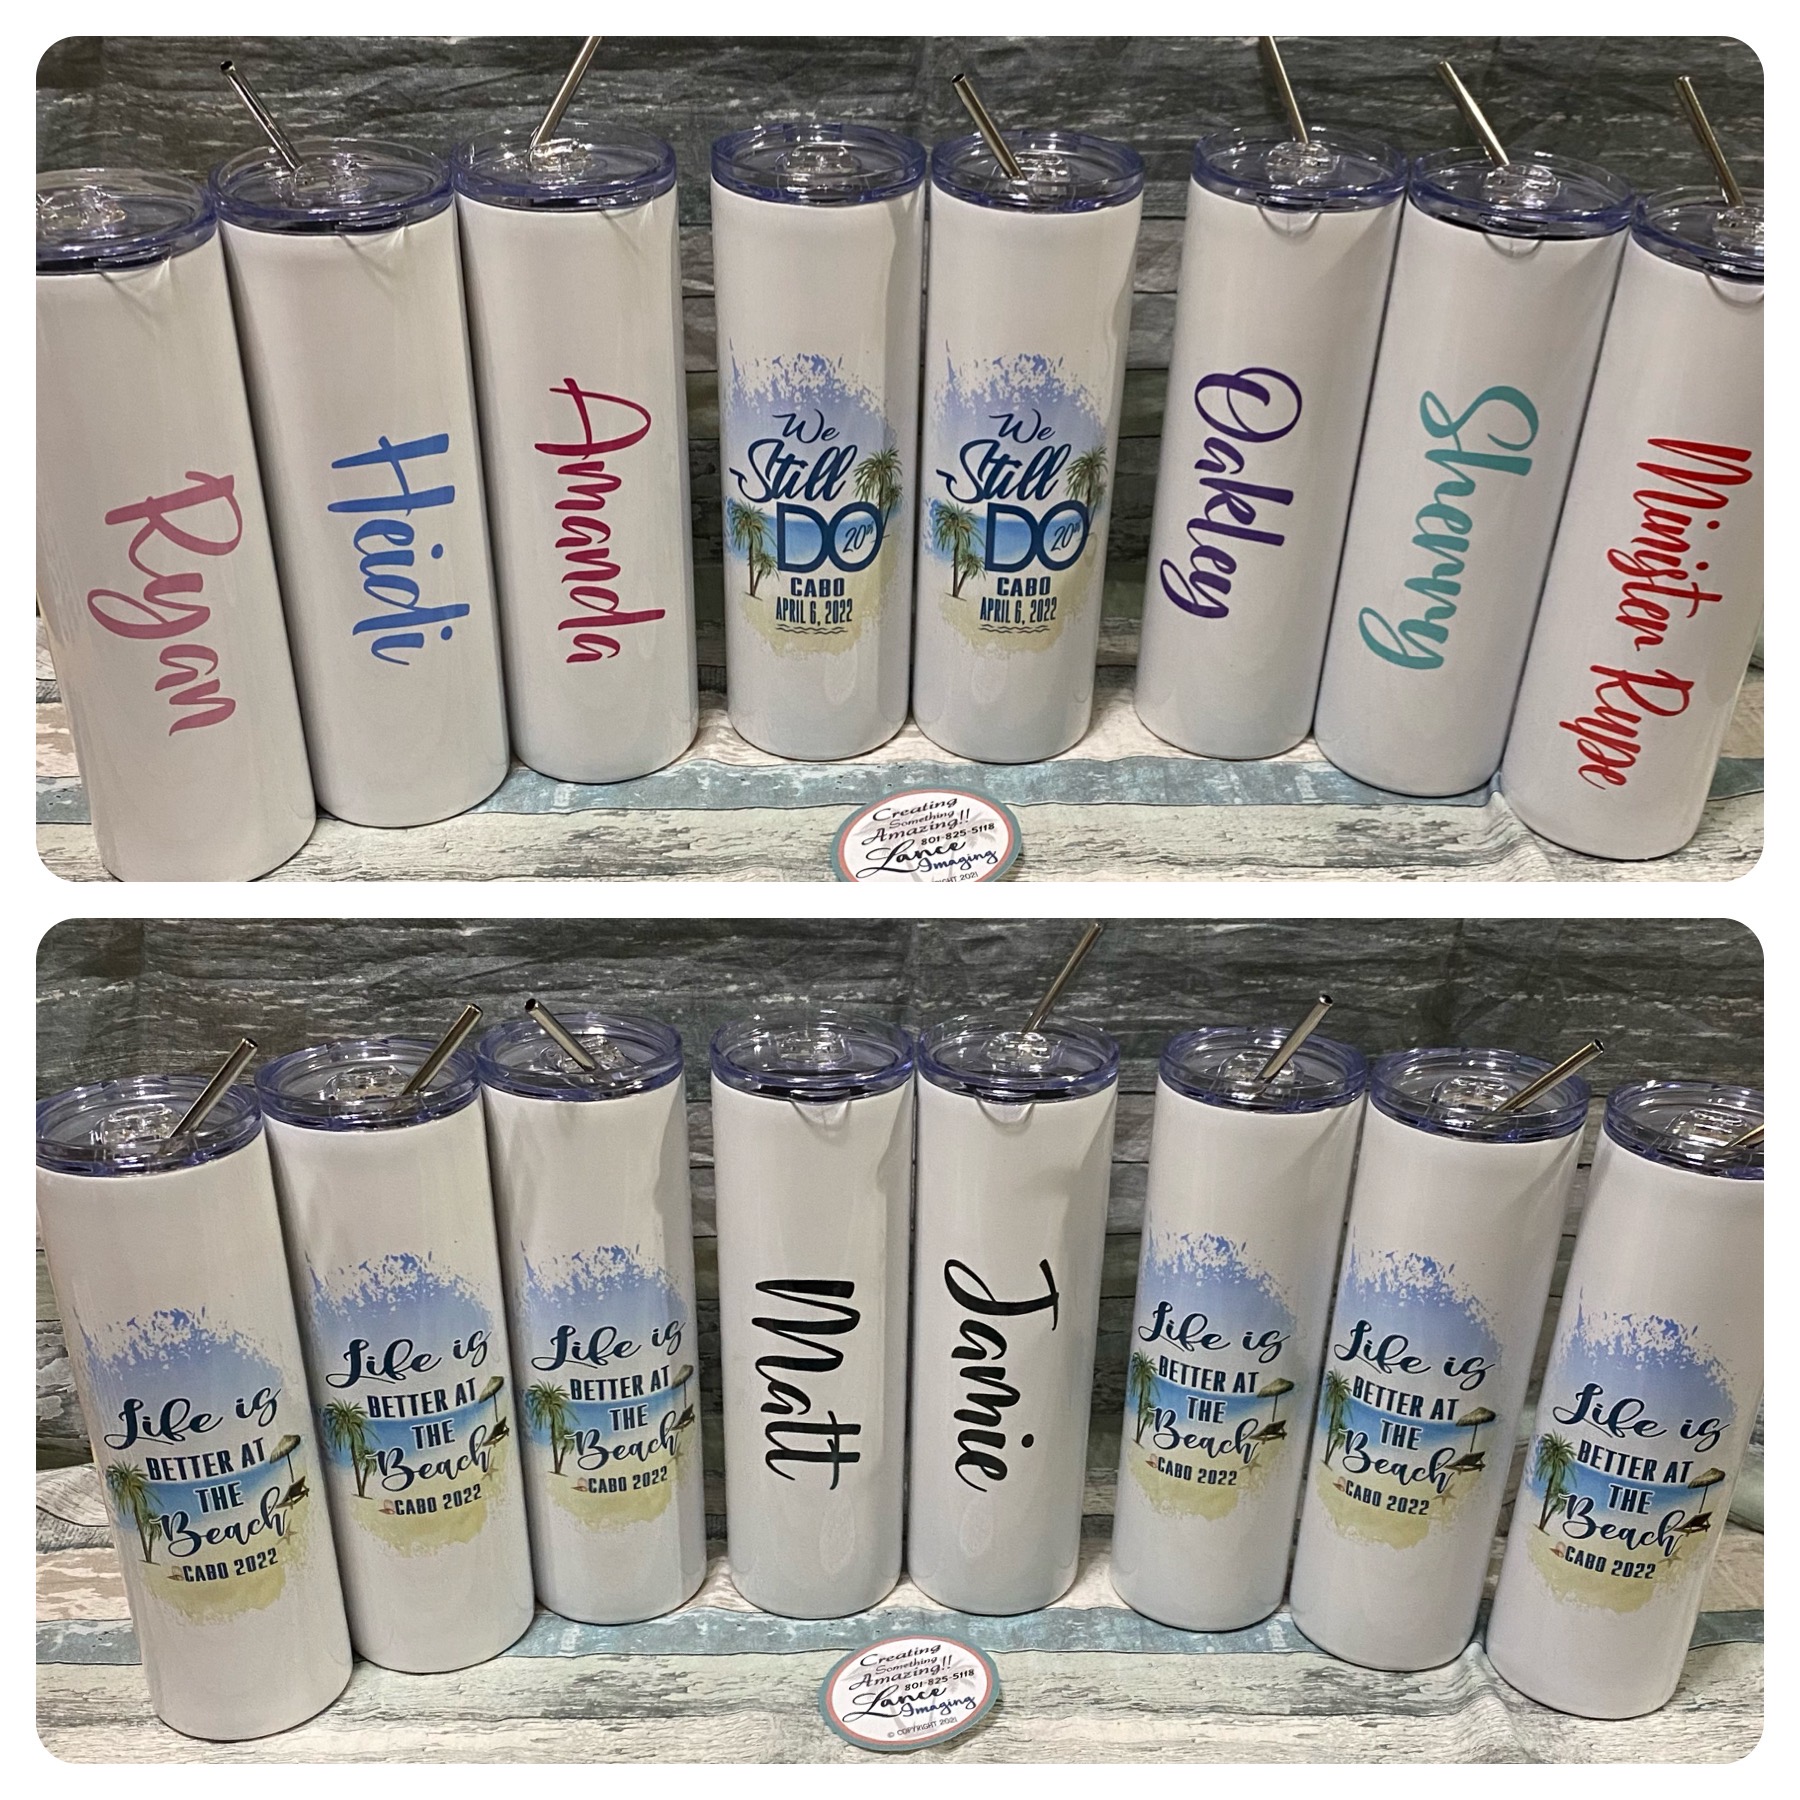 Vow renewal - Wedding party Cups!